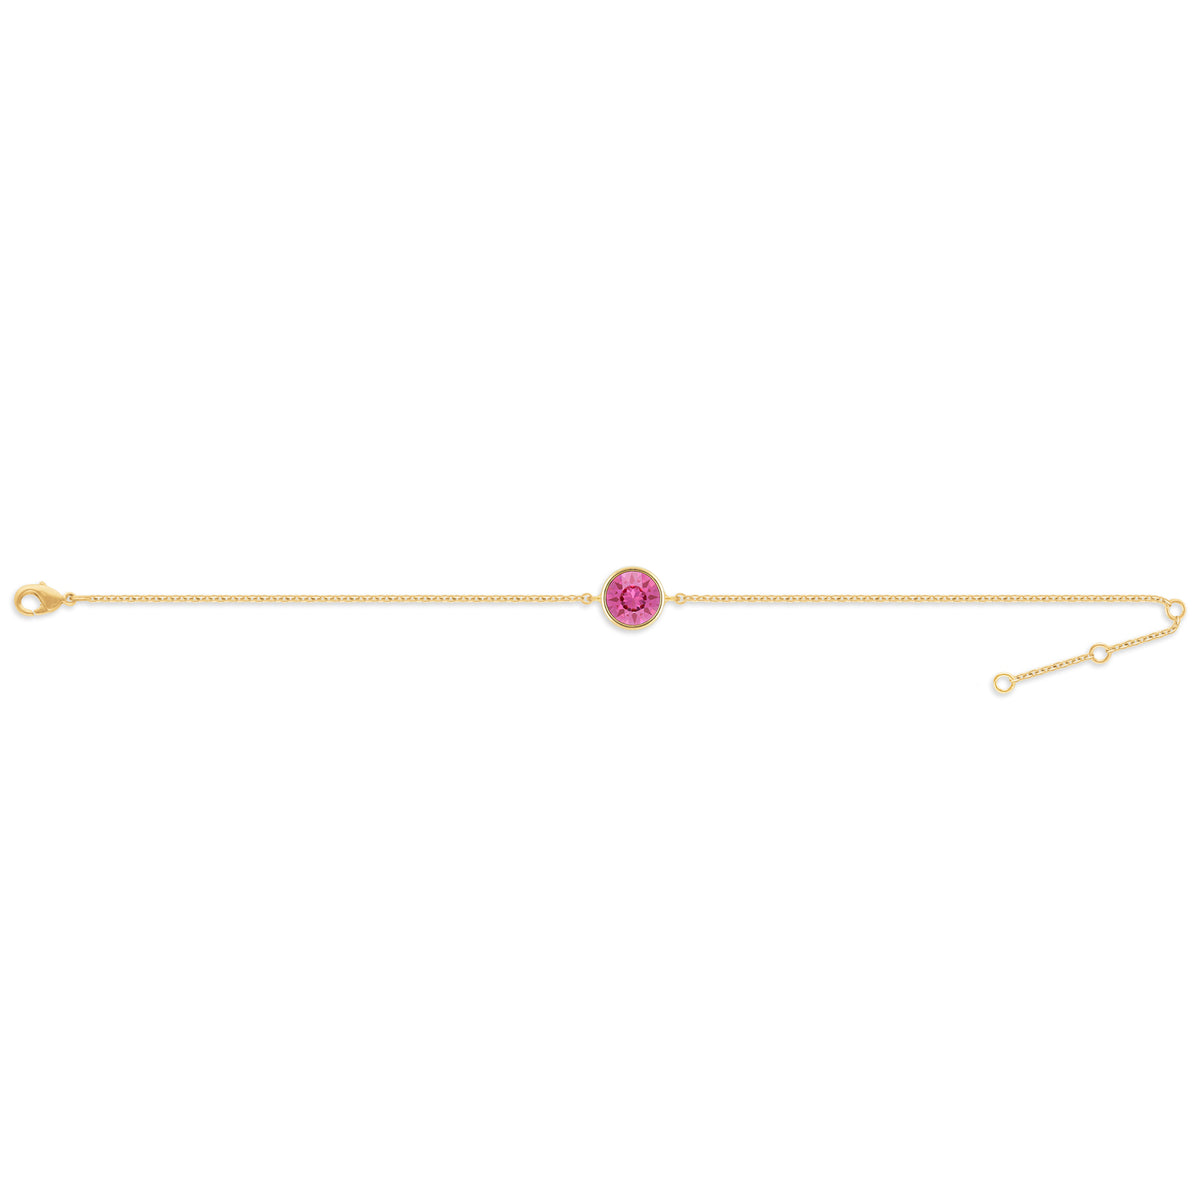 Harley Chain Bracelet with Pink Rose Round Crystals from Swarovski Gold Plated - Ed Heart